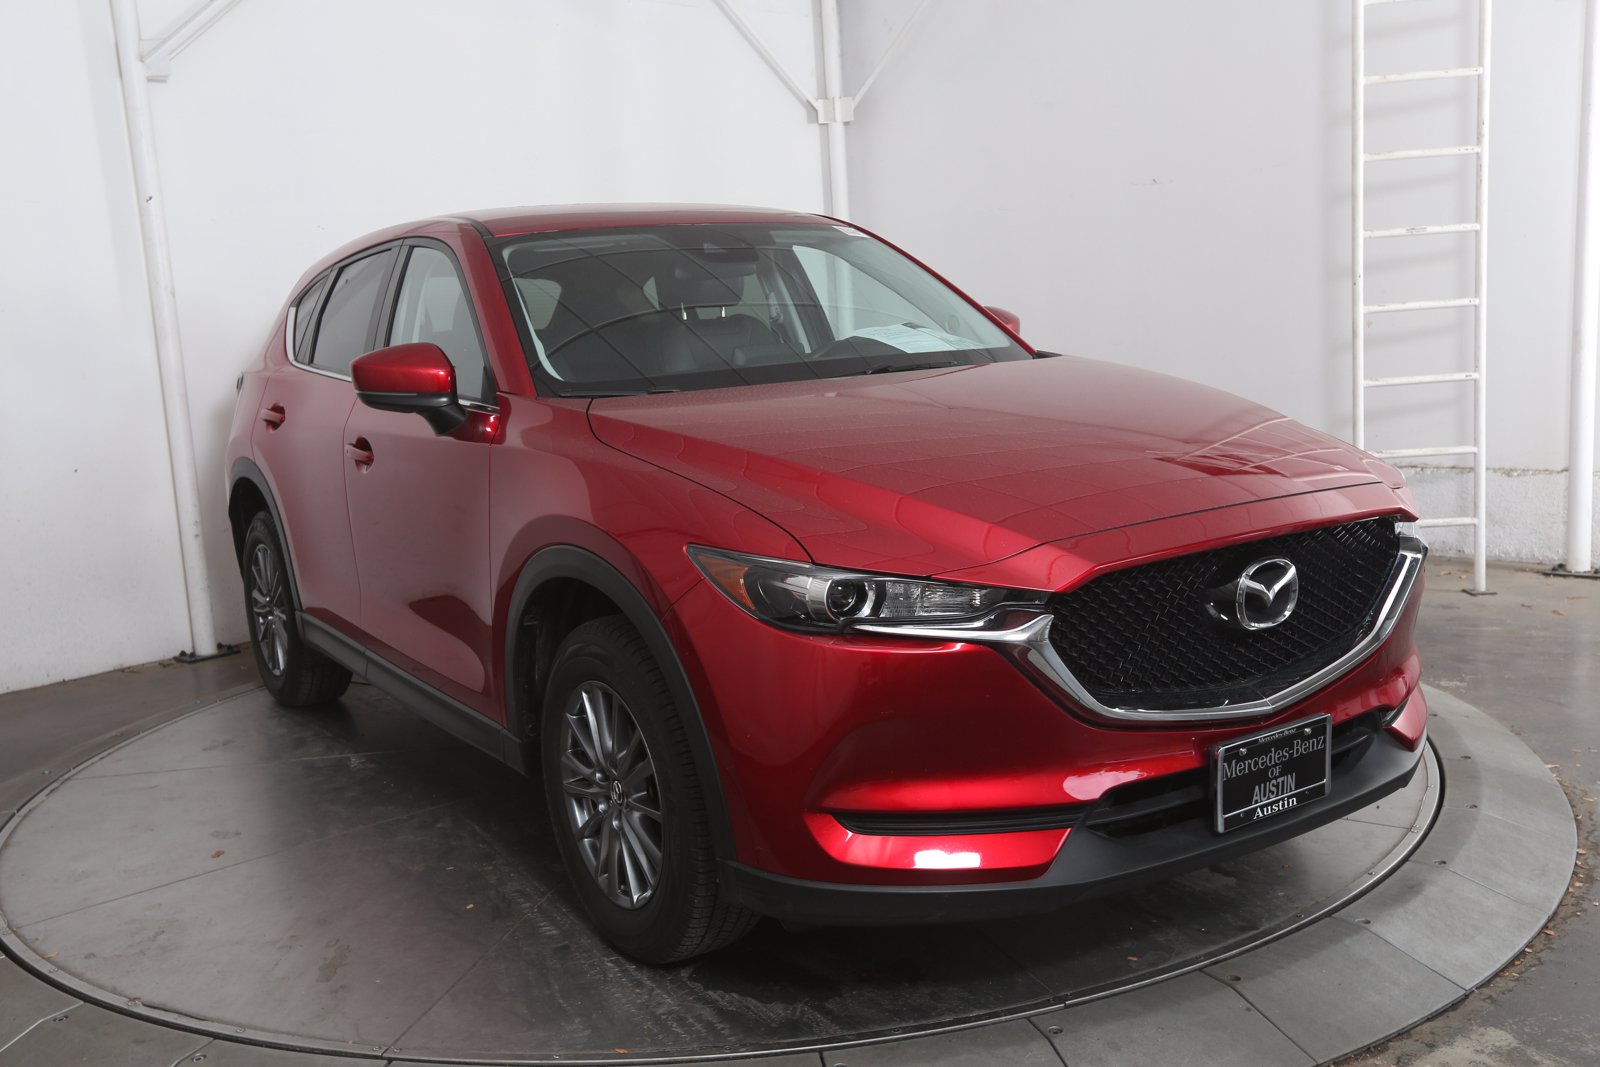 Pre-Owned 2017 Mazda CX-5 Touring 4D Sport Utility in Austin #M61033A ...